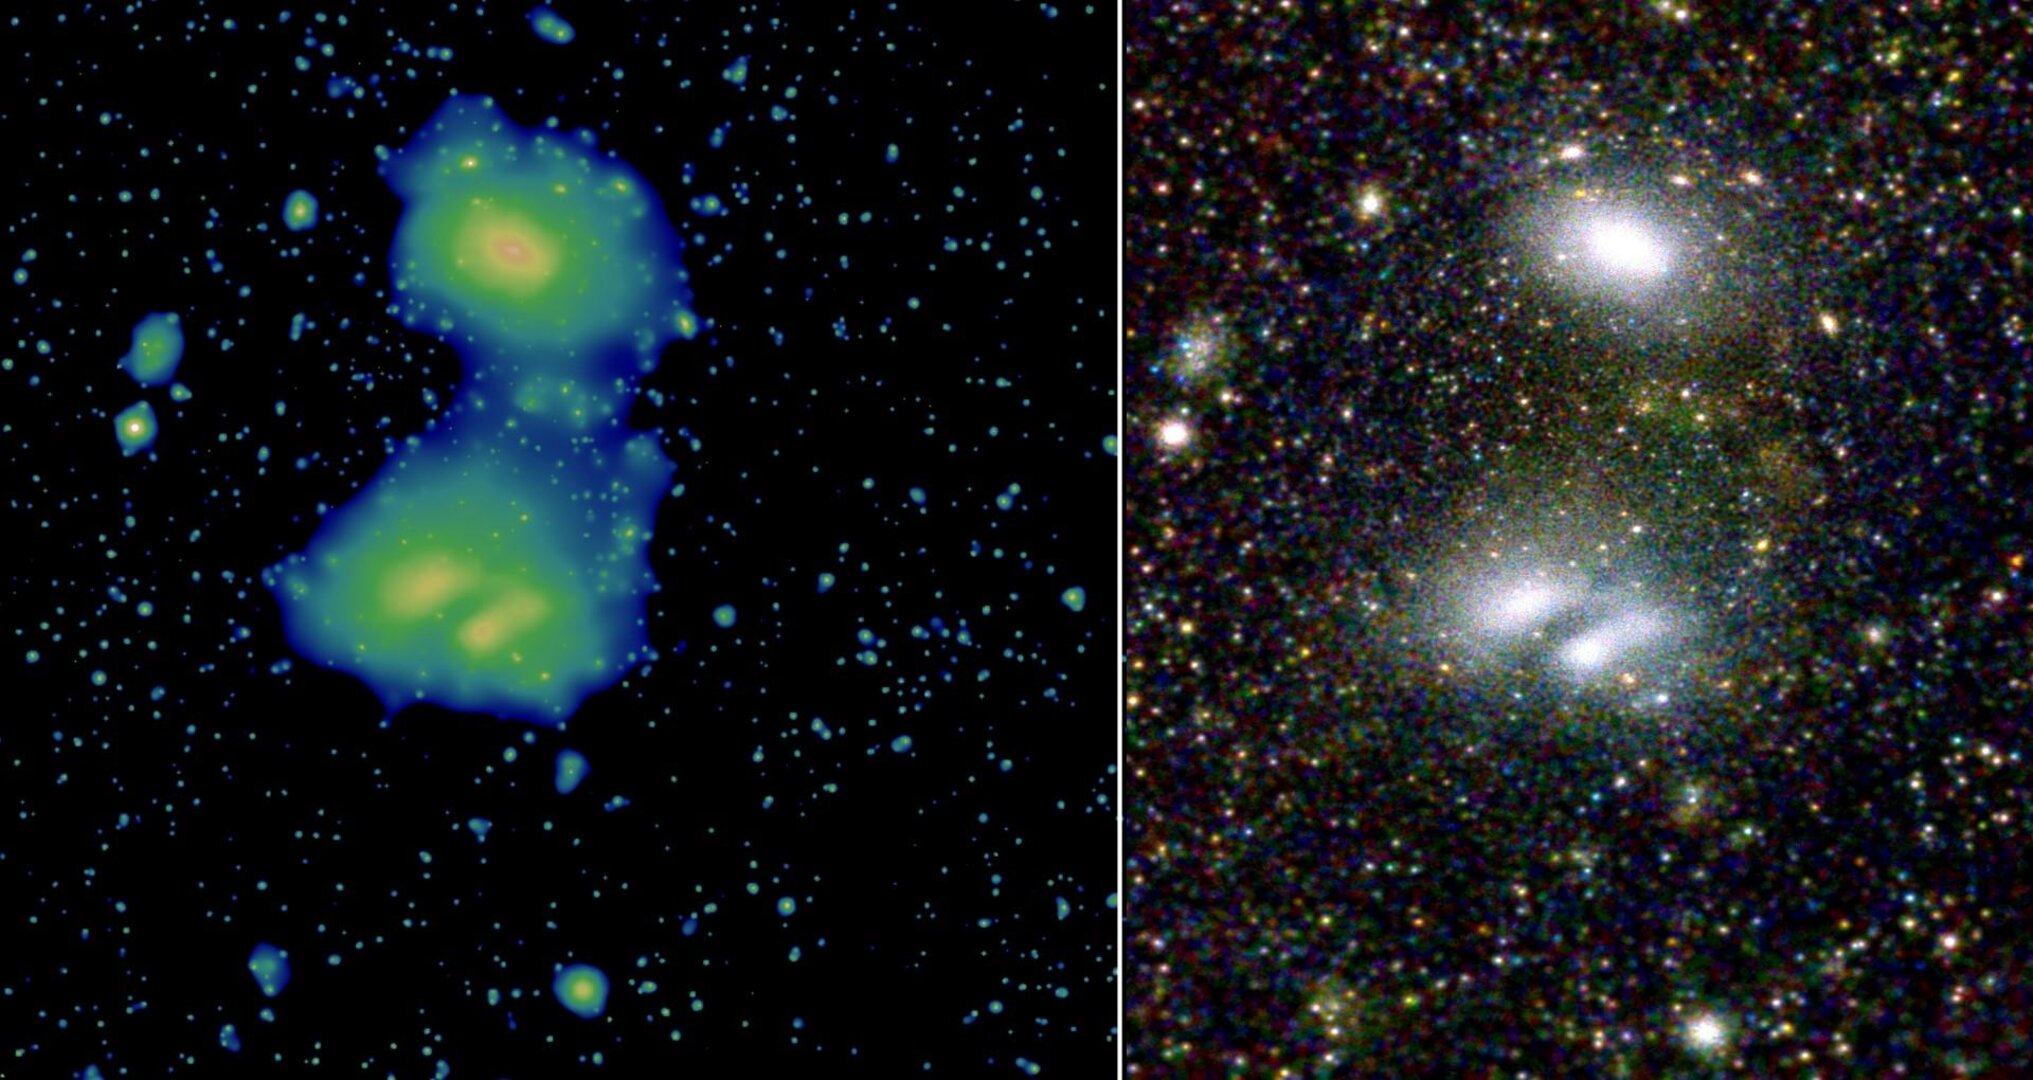 eRosita views two interacting galaxy clusters, A3391 and A3395